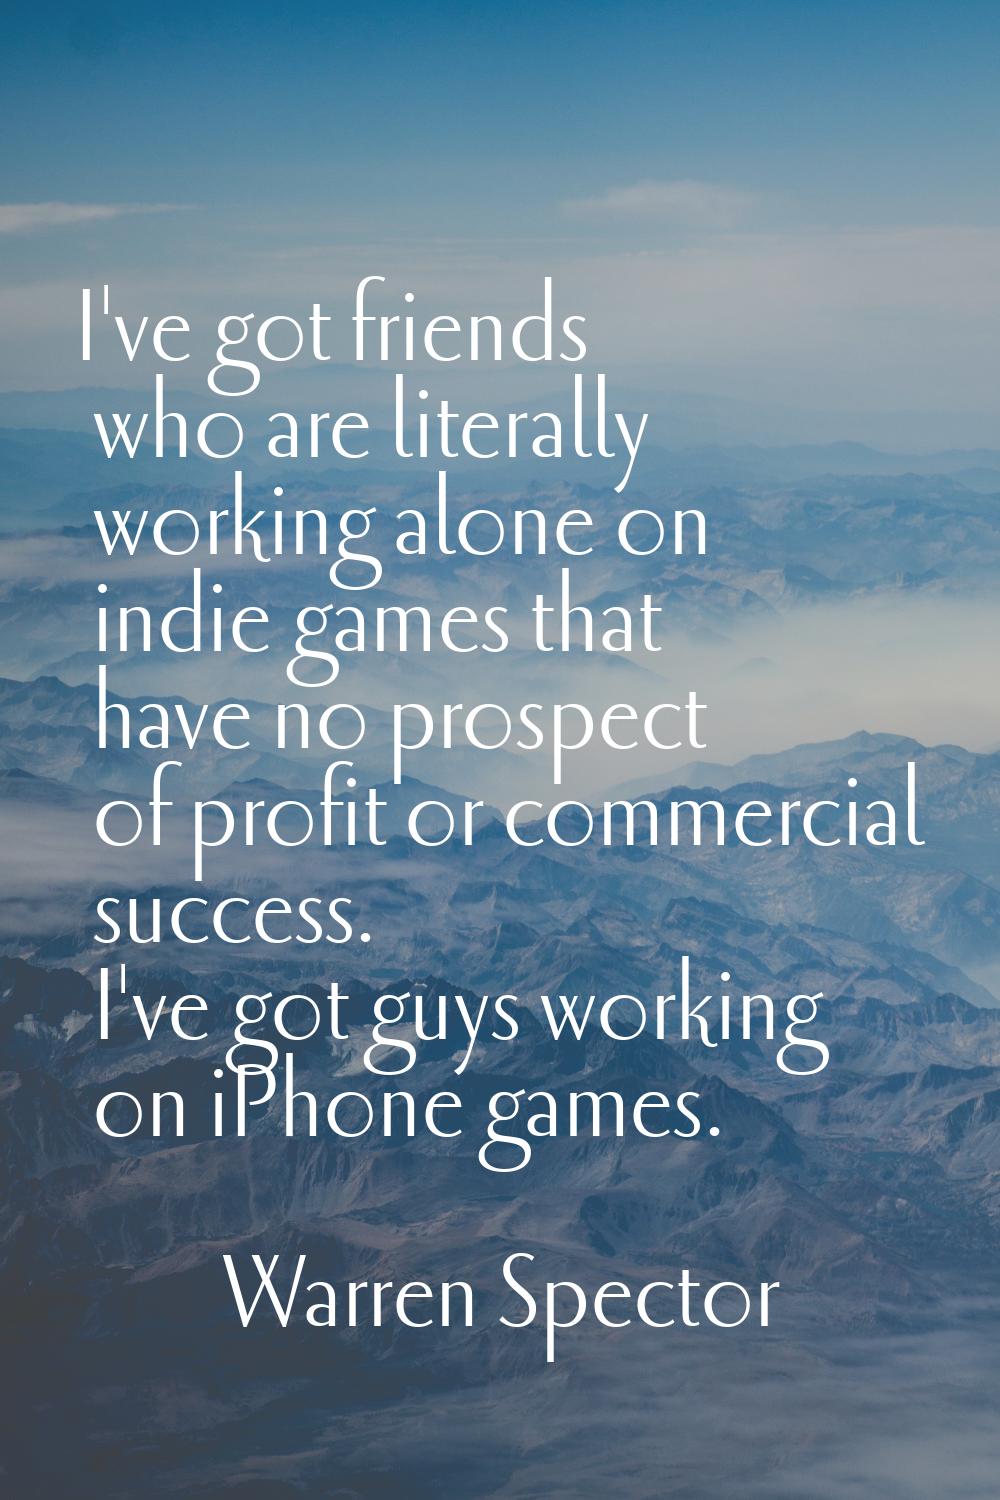 I've got friends who are literally working alone on indie games that have no prospect of profit or 